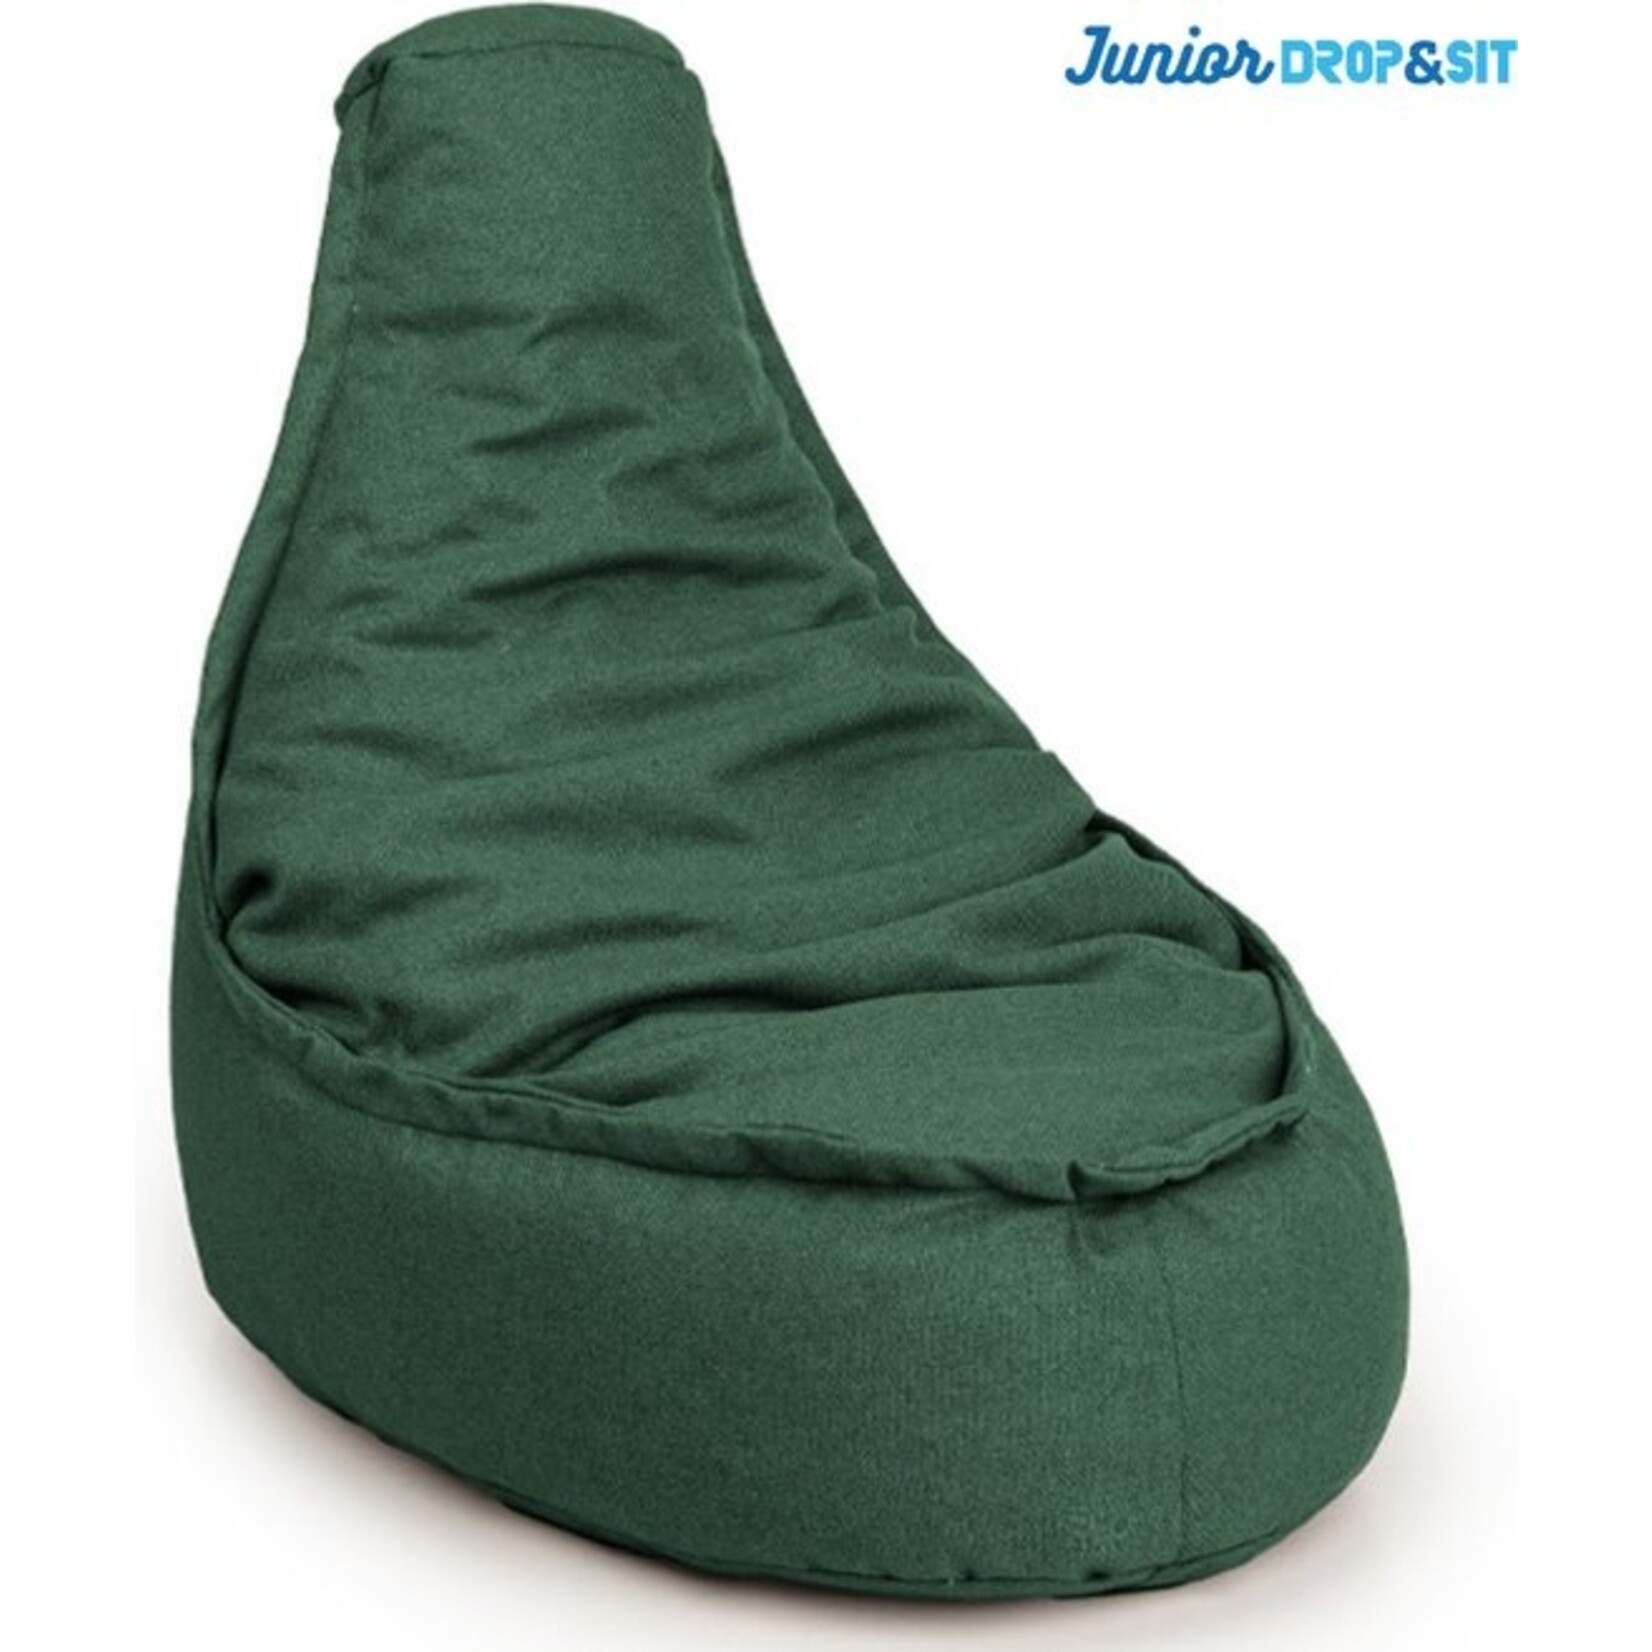 Drop & Sit - Beanbag Chair Durable - 100% Recycled PET Bottles - Green - Junior - For indoor and outdoor use